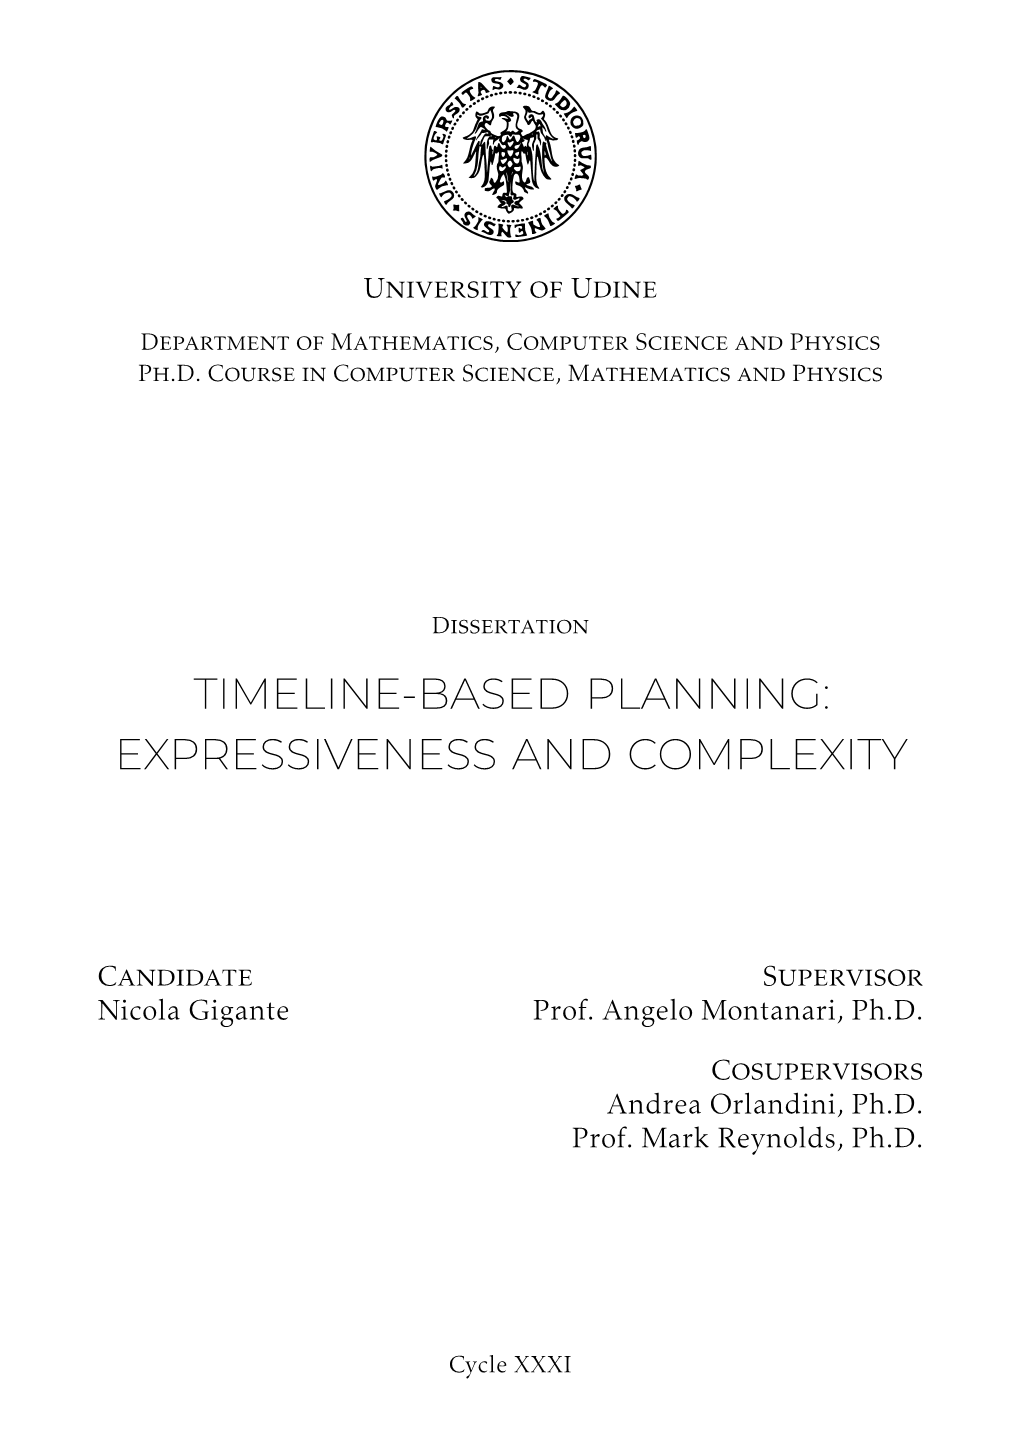 Timeline-Based Planning: Expressiveness and Complexity